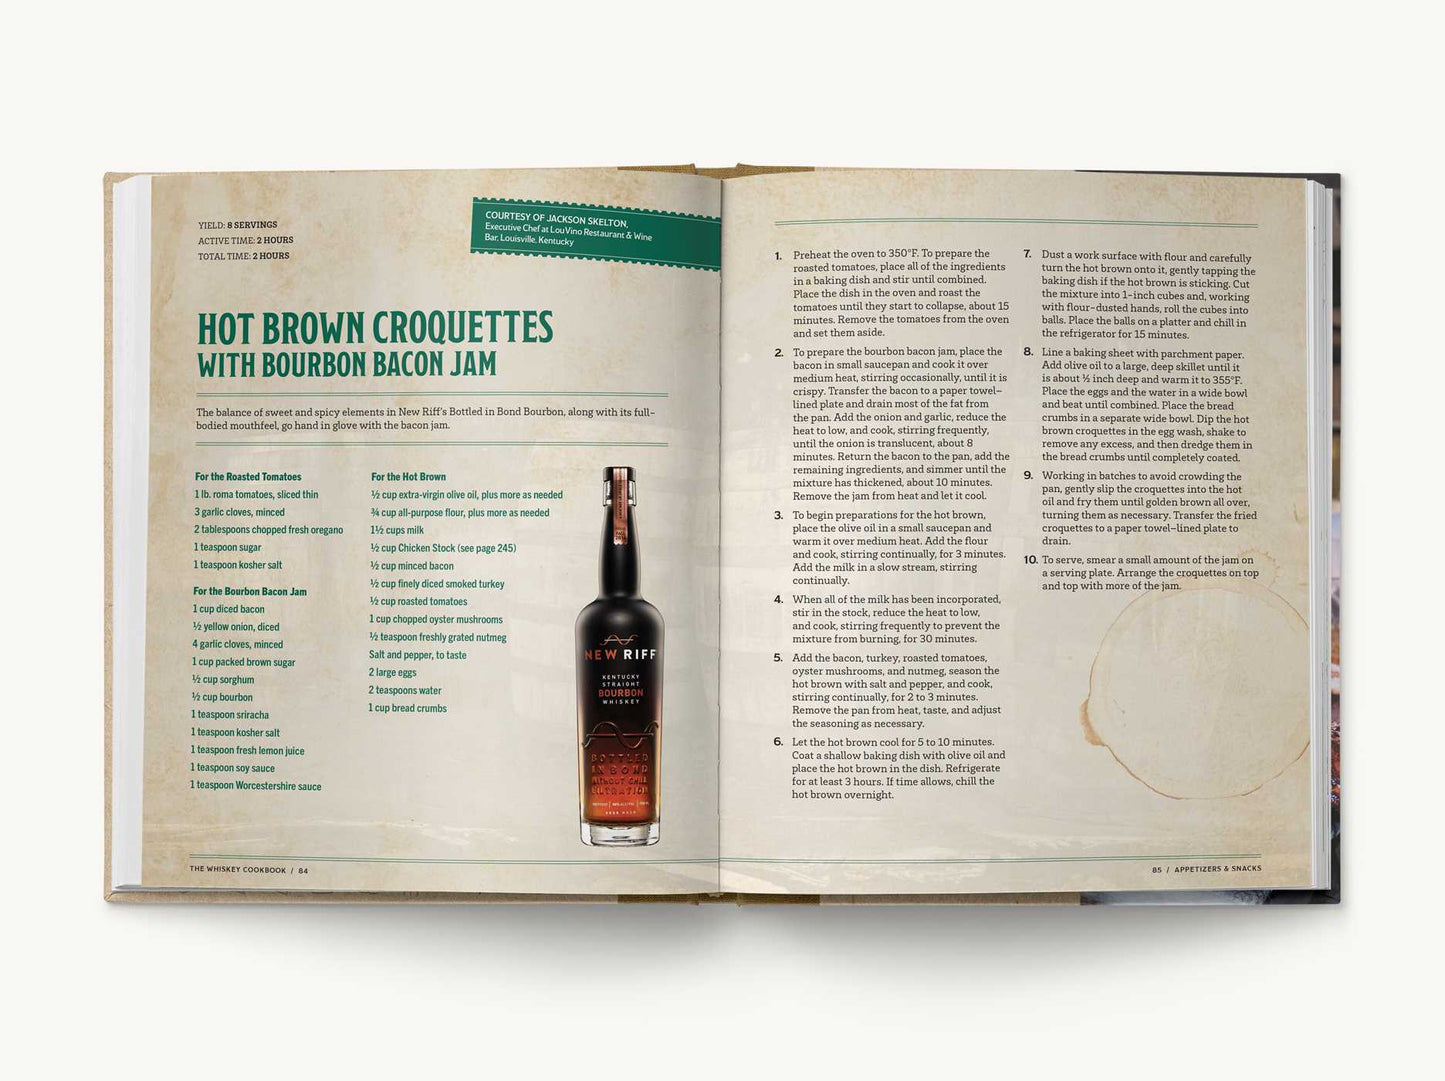 The Whiskey Cookbook: Sensational Tasting Notes and Pairings for Bourbon, Rye, Scotch, and Single Malts